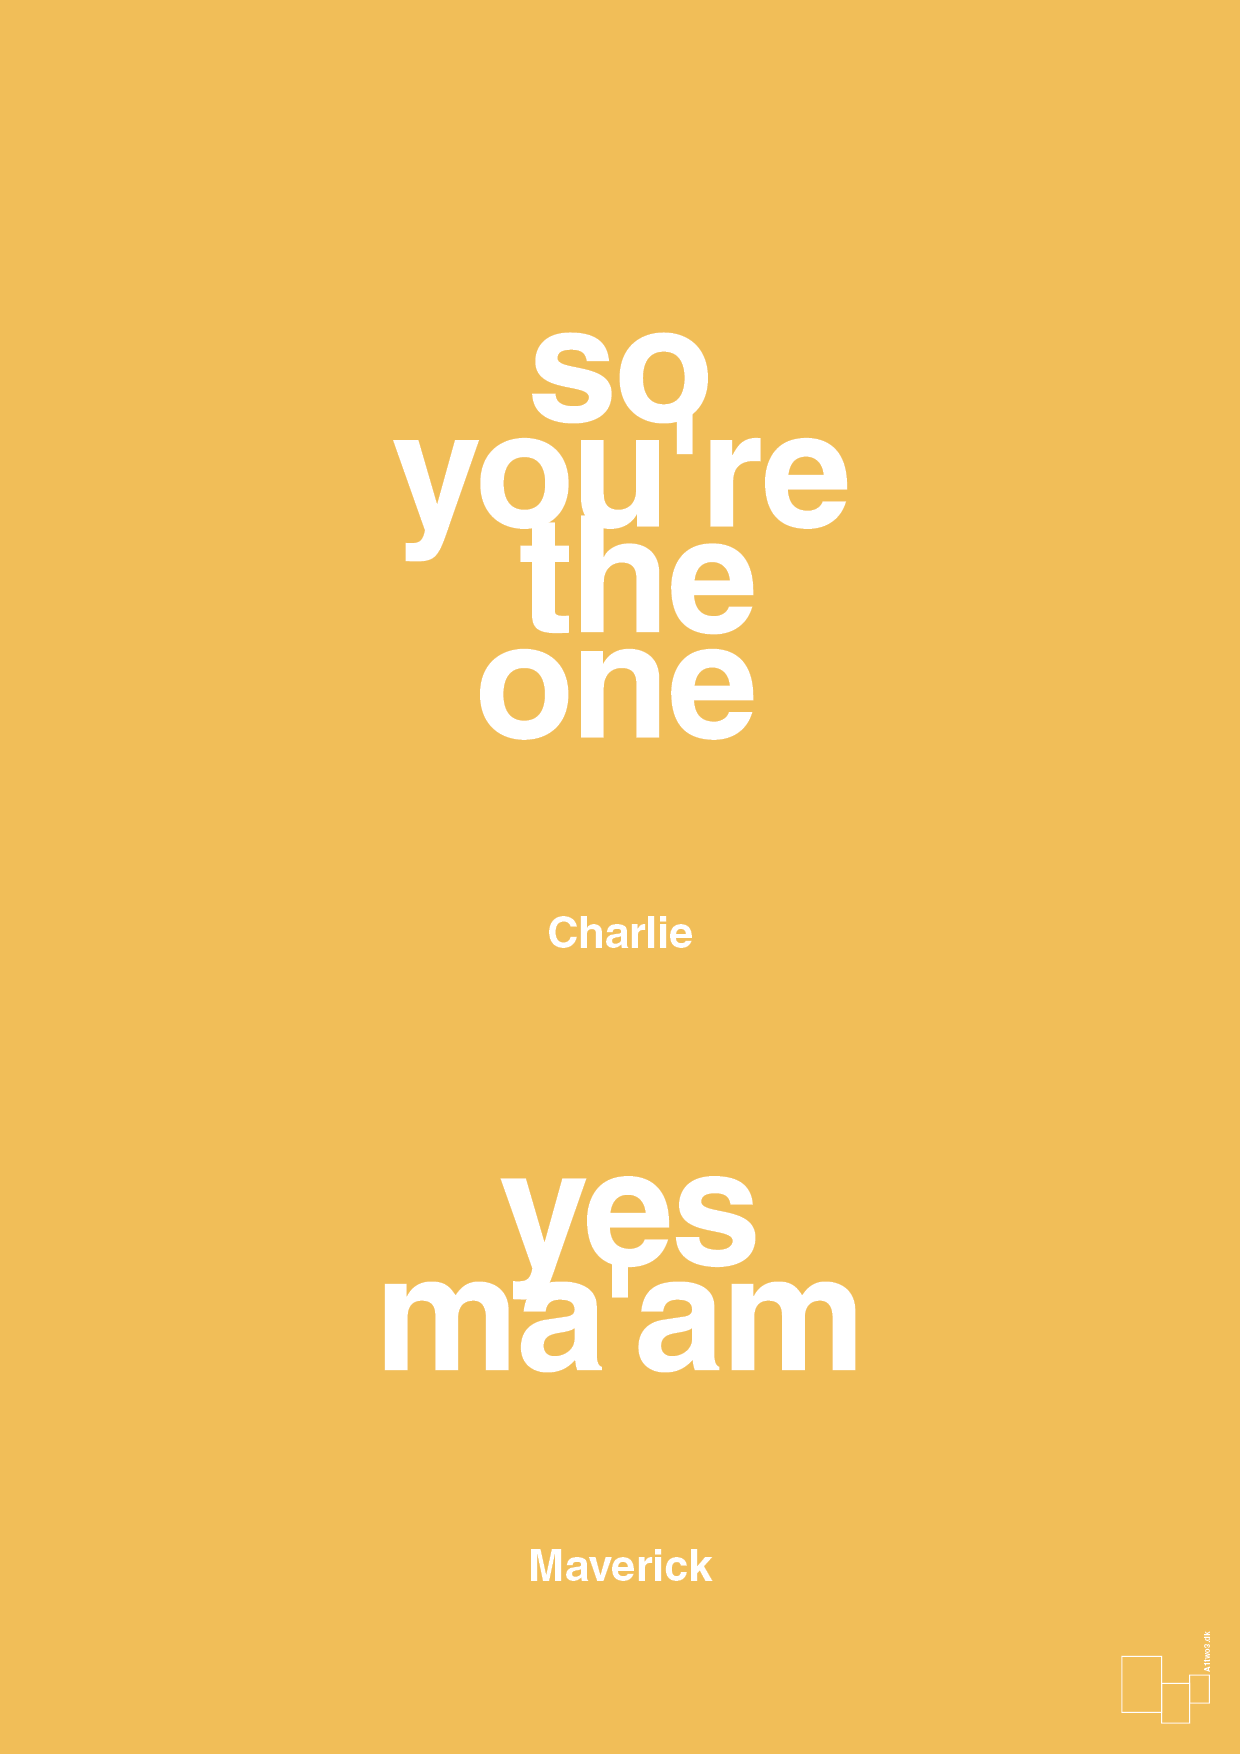 so you're the one - yes ma'am - Plakat med Citater i Honeycomb